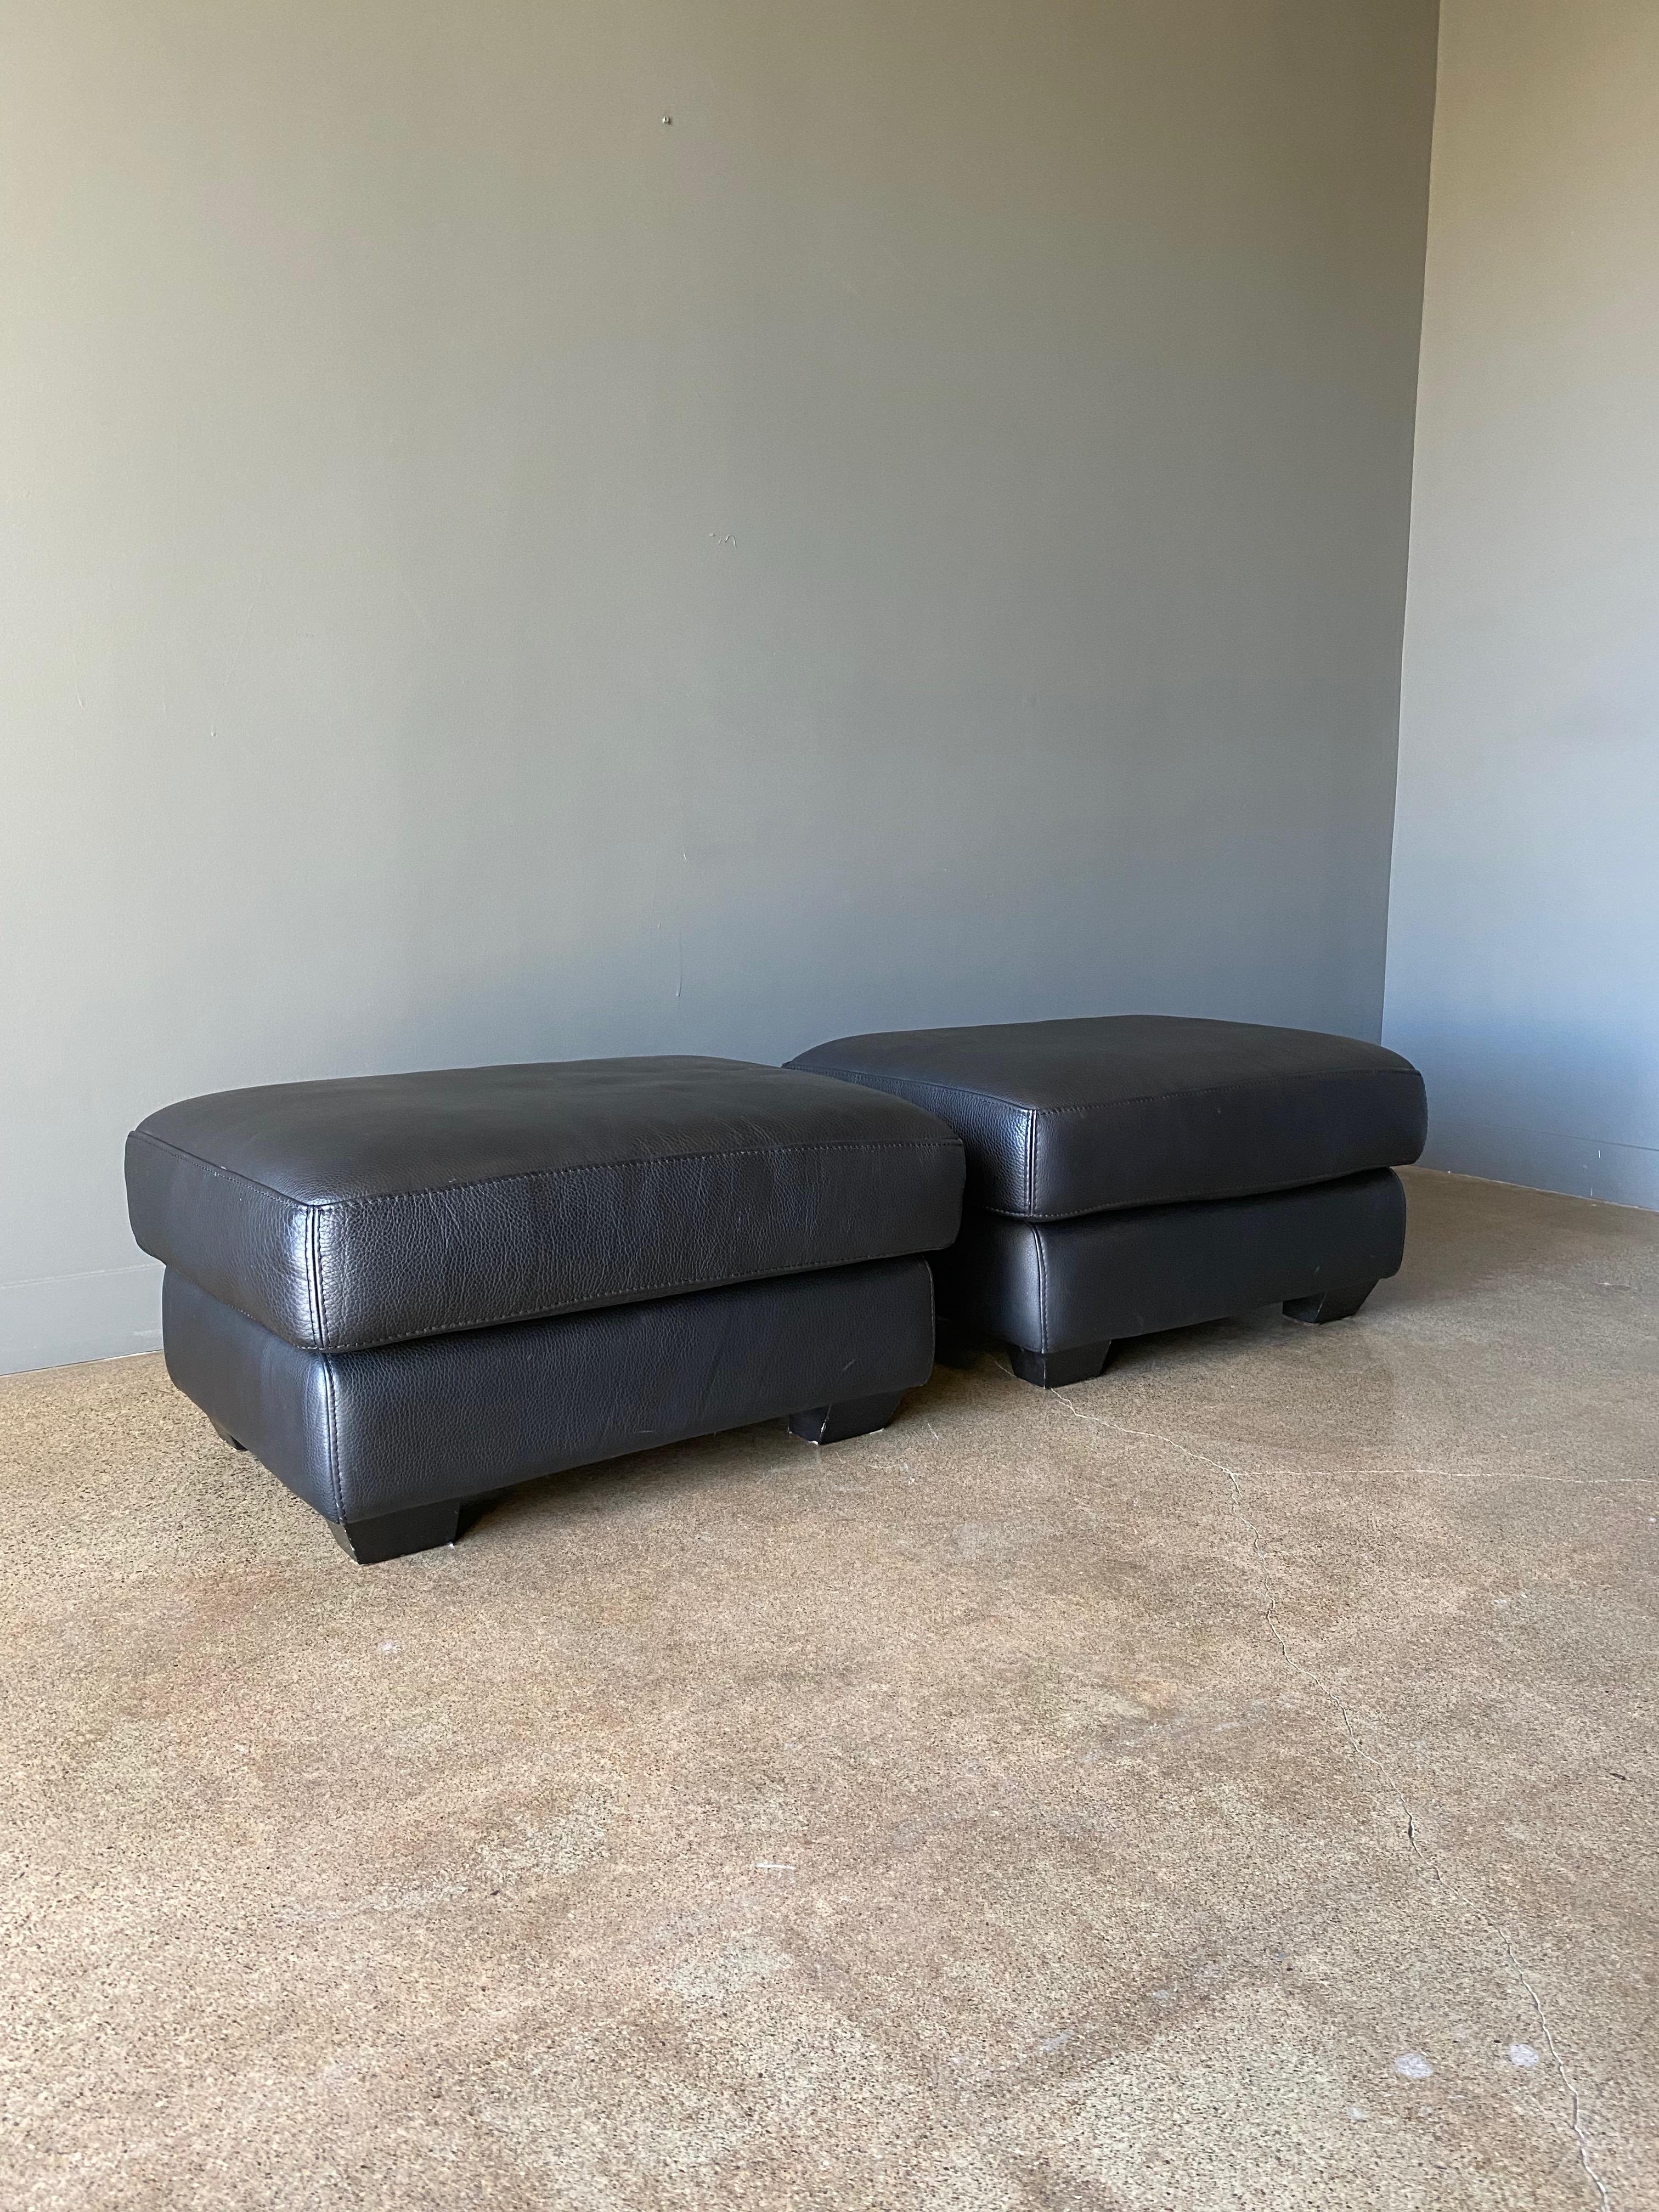 Late 20th Century Post Modern Leather Ottomans by Roche Bobois, Circa 1980s